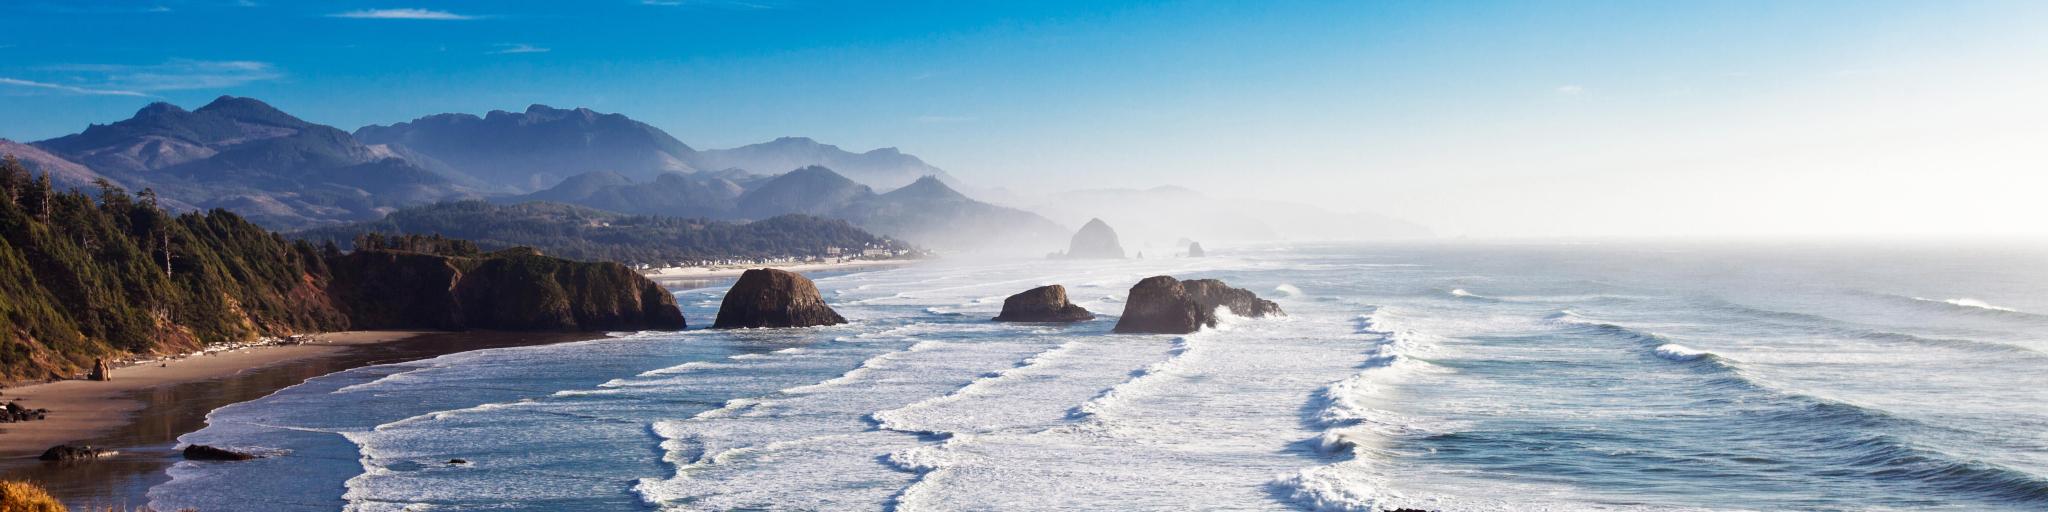 White foam waves lapping along Cannon Beach shoreline with Haystack Rock in the background